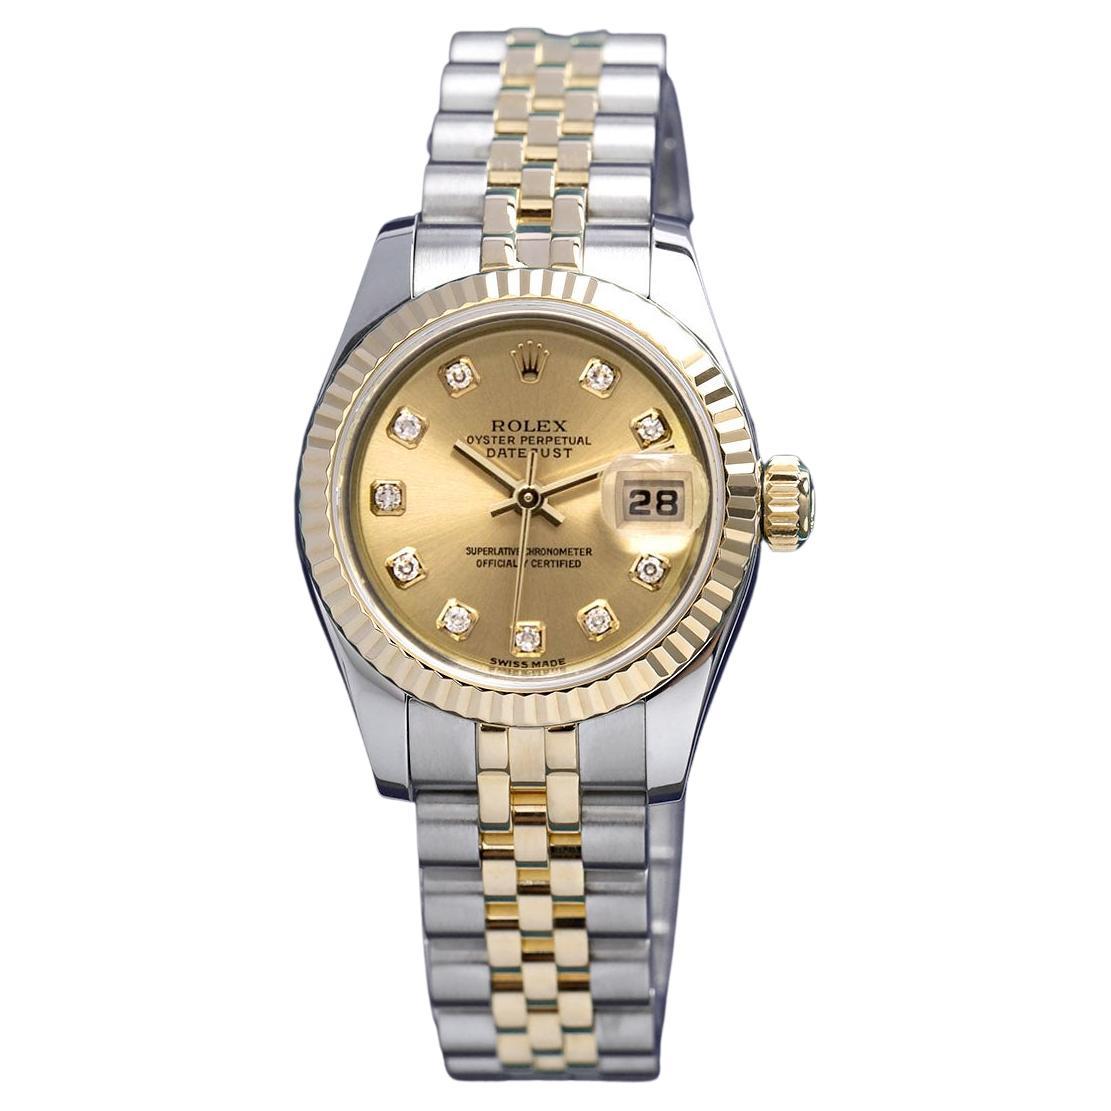 Rolex Lady-Datejust 179173 Steel/Yellow Gold Watch Champagne Diamond Dial For Sale